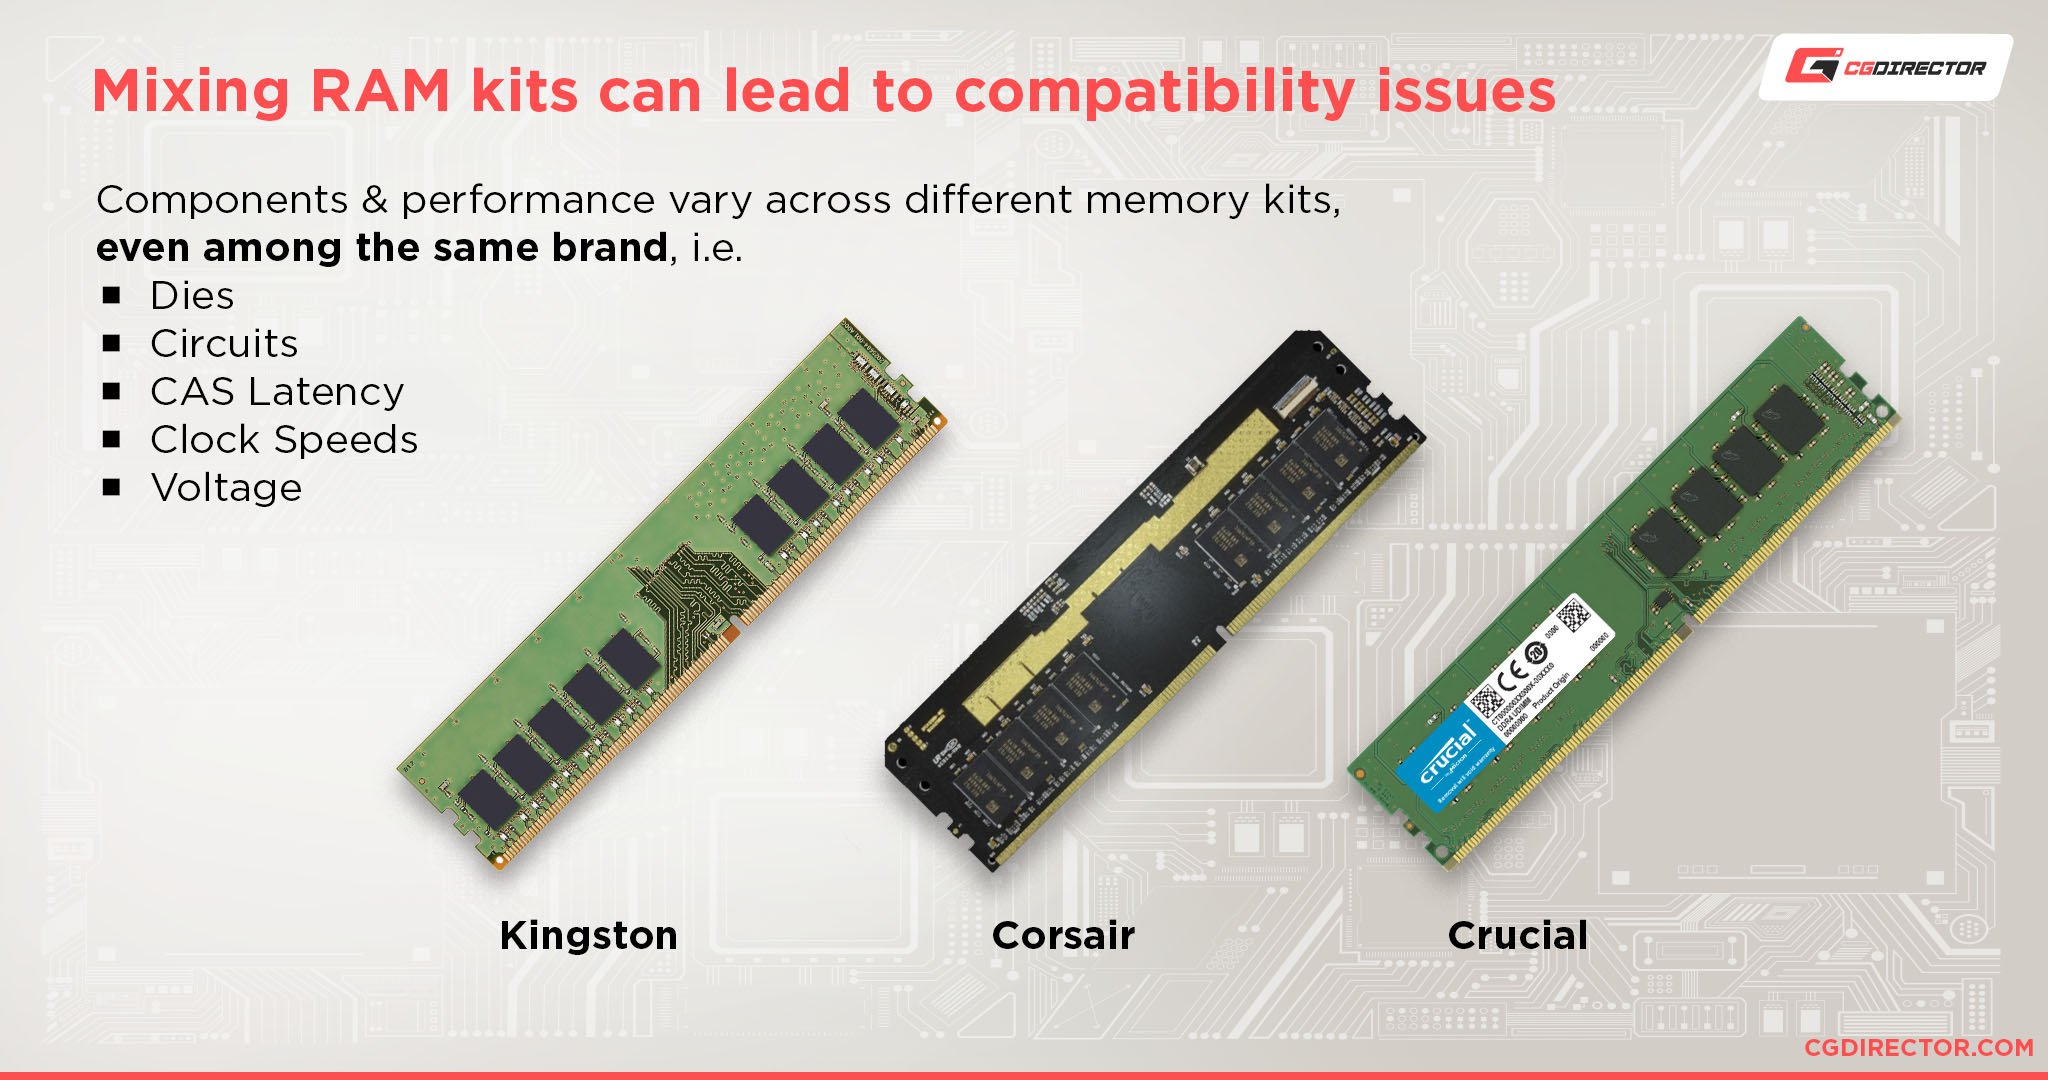 Mixing RAM kits can lead to compatibility issues